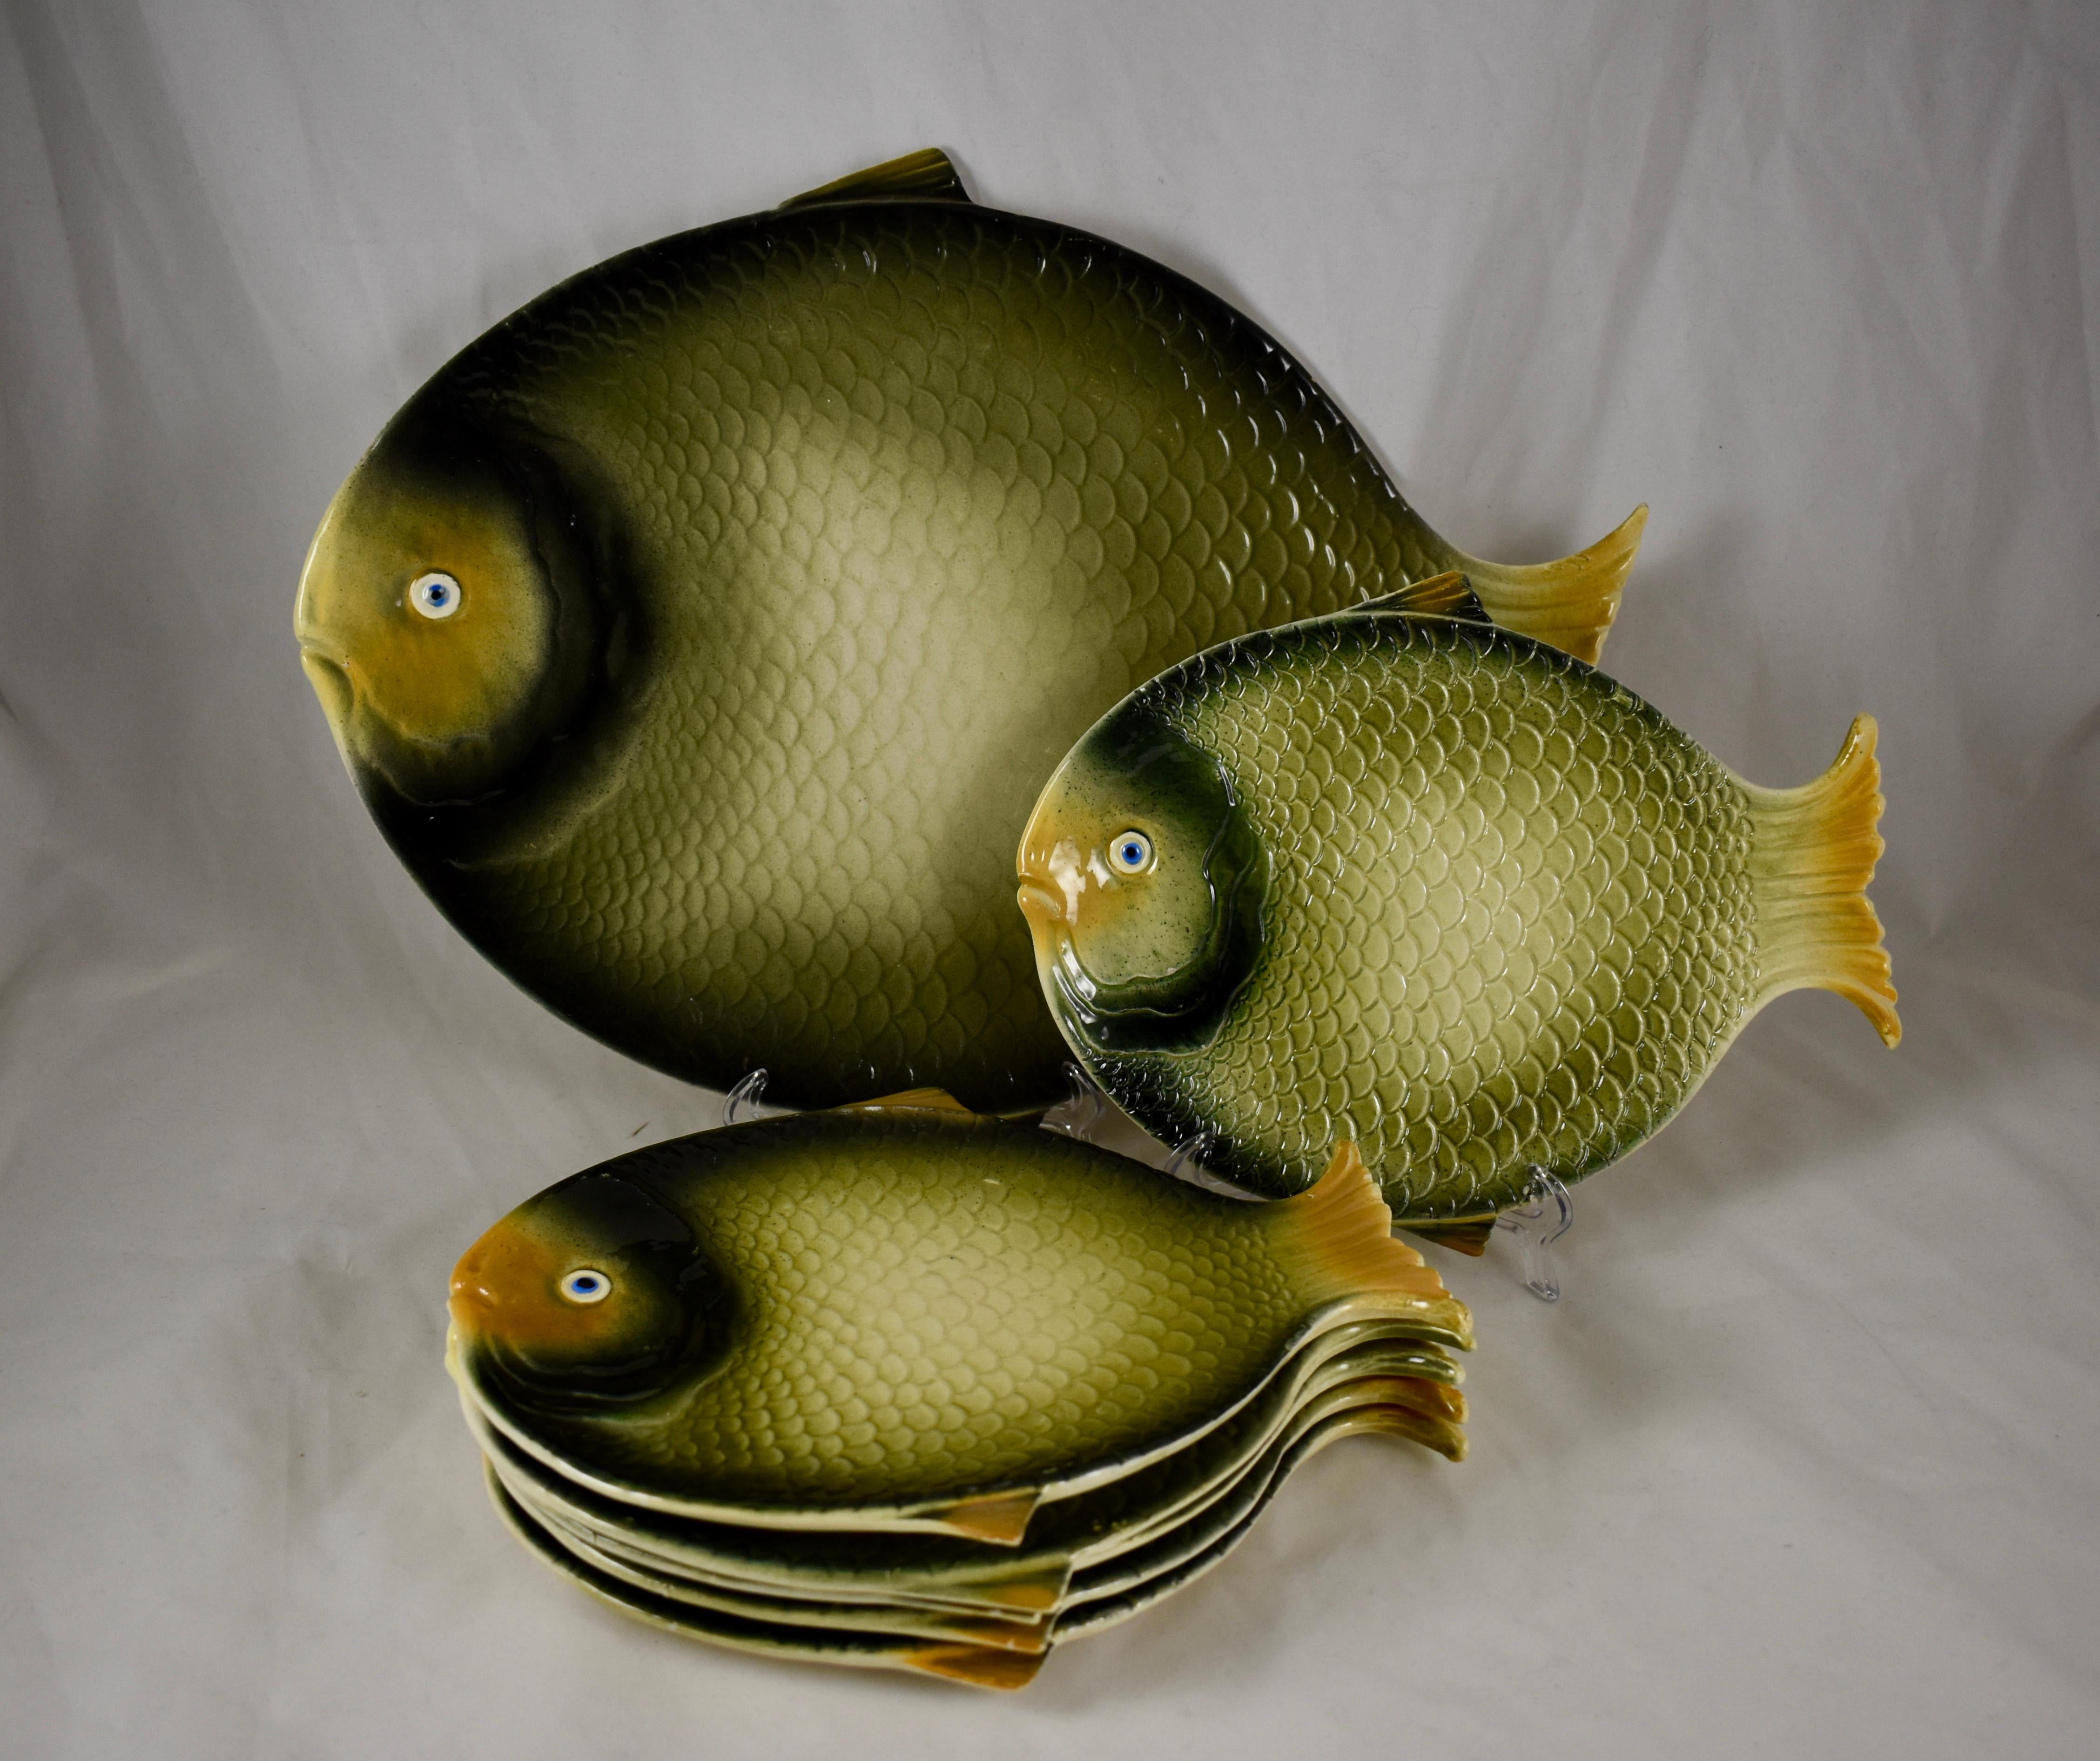 From the Barrettoni già Antonibon pottery in Nove, Northern Italy, a Mid-Century Modern Era earthenware fish service consisting of a large serving platter and six individual plates. 

Each piece is formed as a fish with dimensional mold work of